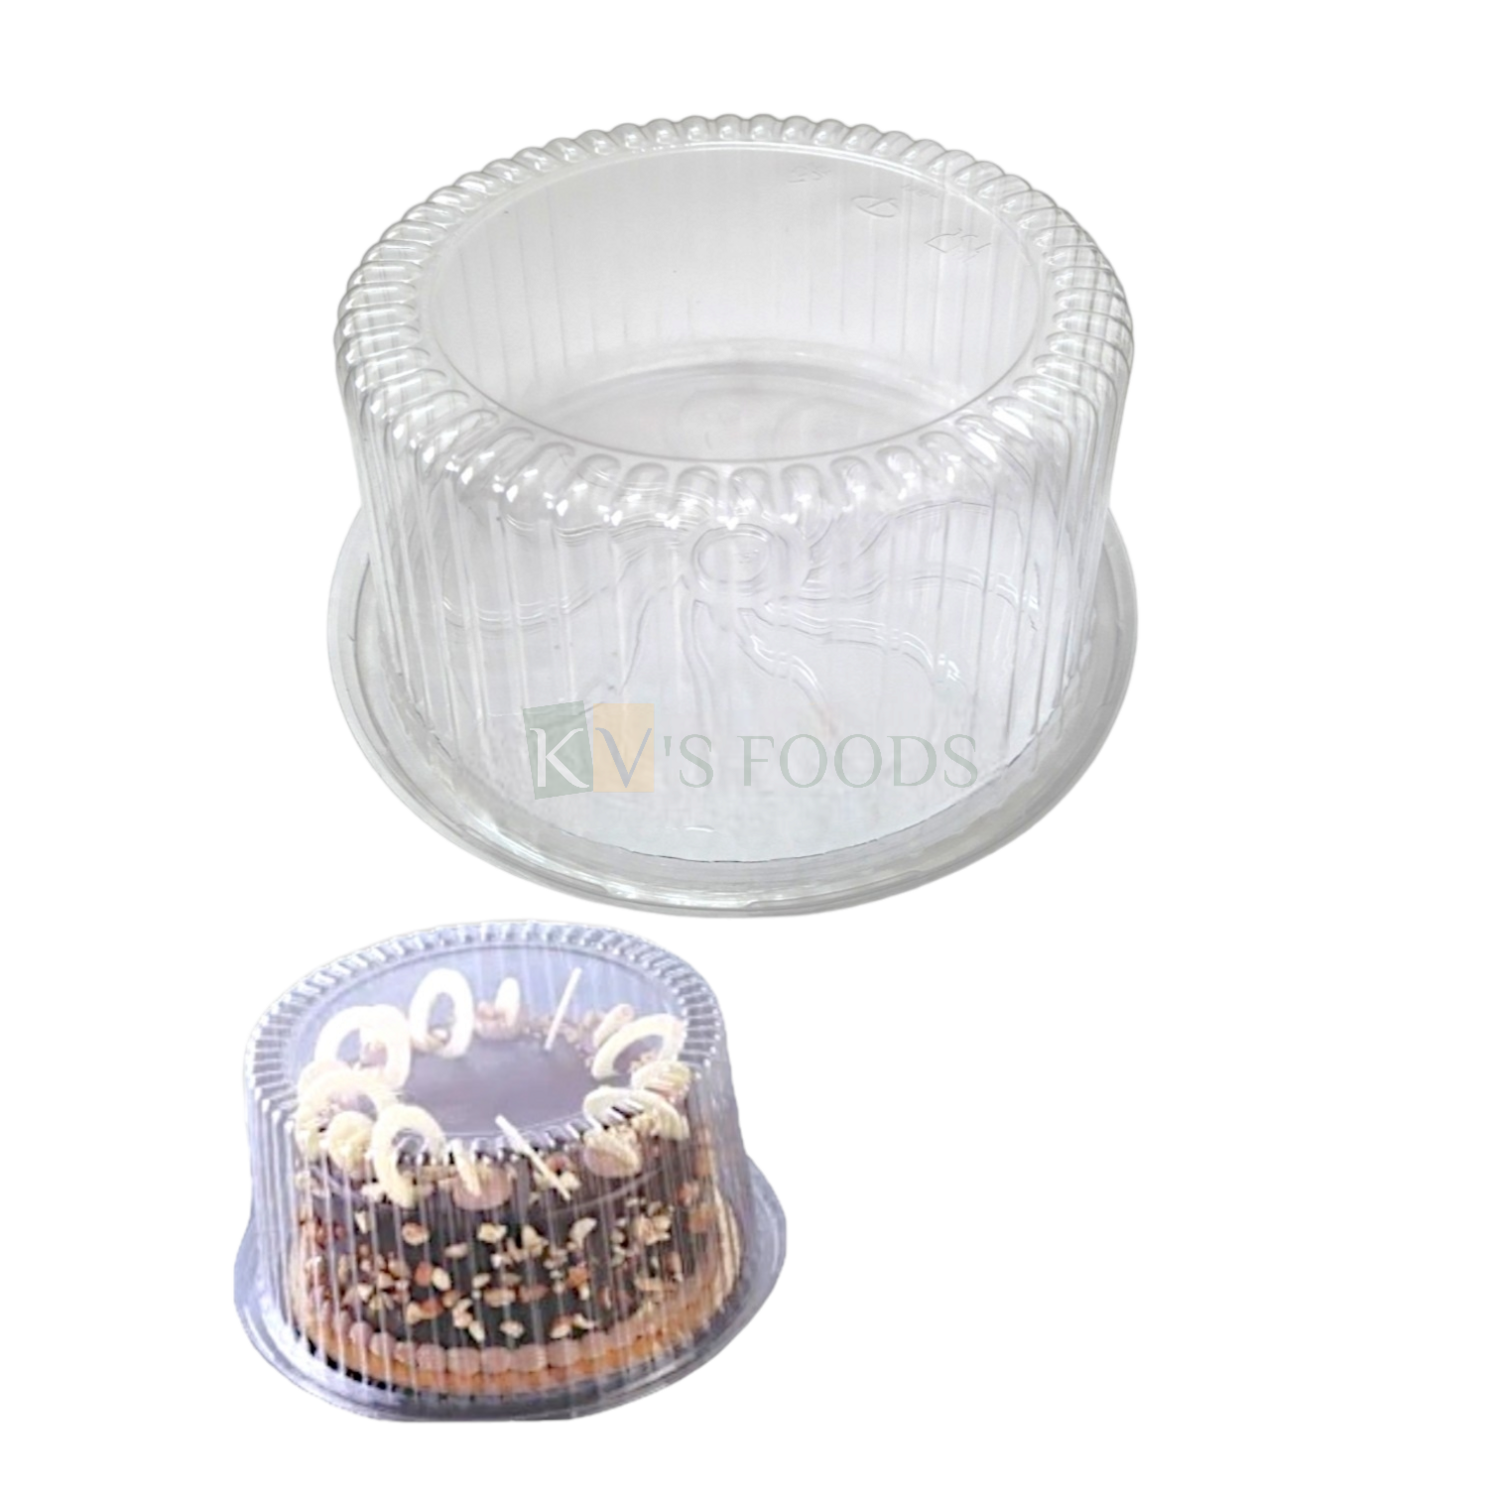 1PC Height 4.9 Inches Capacity ~1/2 Kg (8 Inch) Base Cake Container with Lid, 2 in 1 Transparent Plastic Circle Cake Carriers Holder Reusable Box, Can be used for Storing Cookies, Bakery Accessories